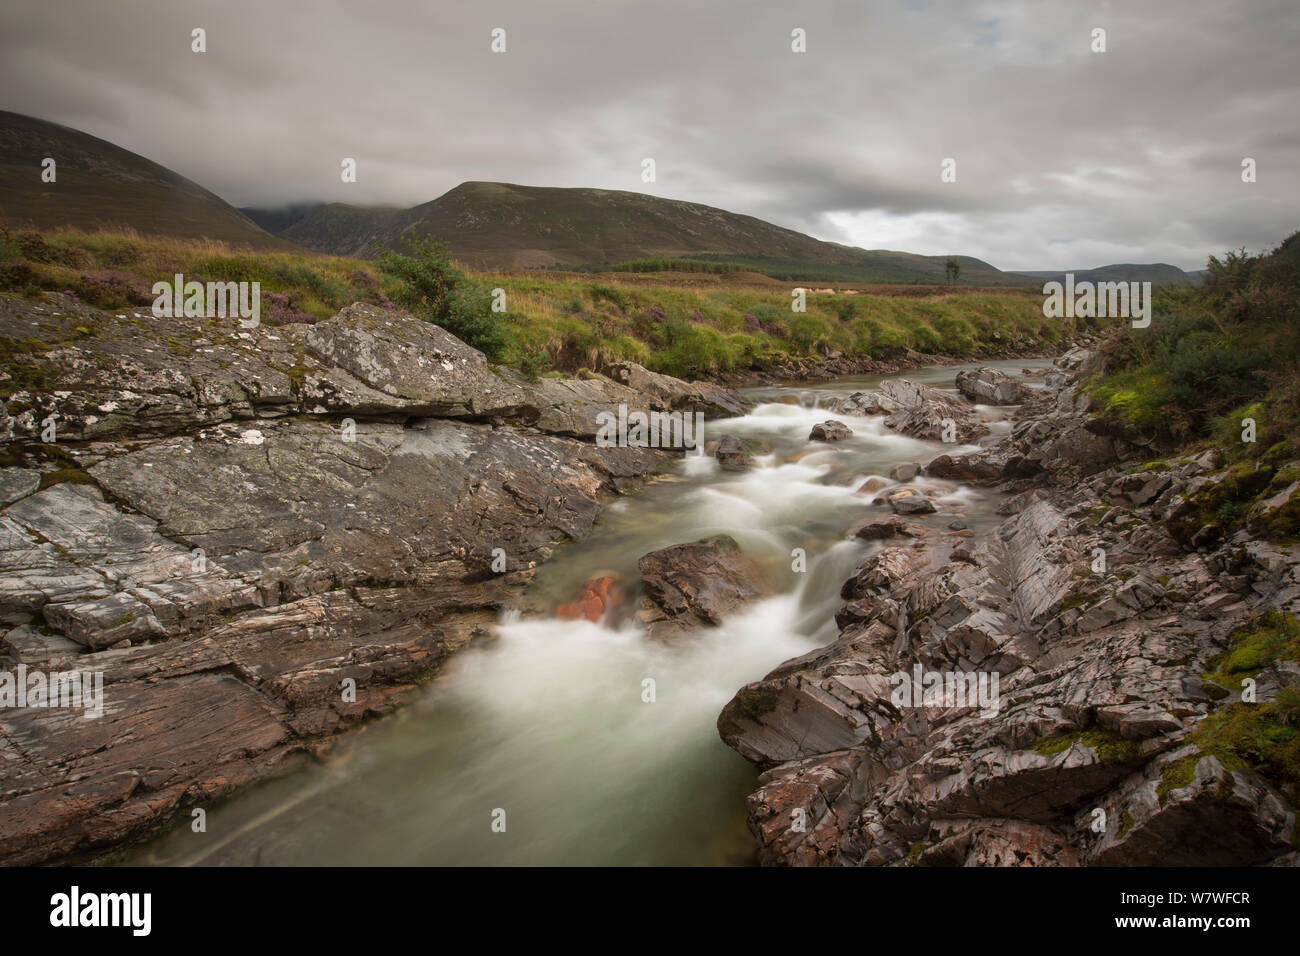 Overcast day over River Feshie, Glenfeshie, Cairngorms National Park, Scotland, August 2013. Stock Photo